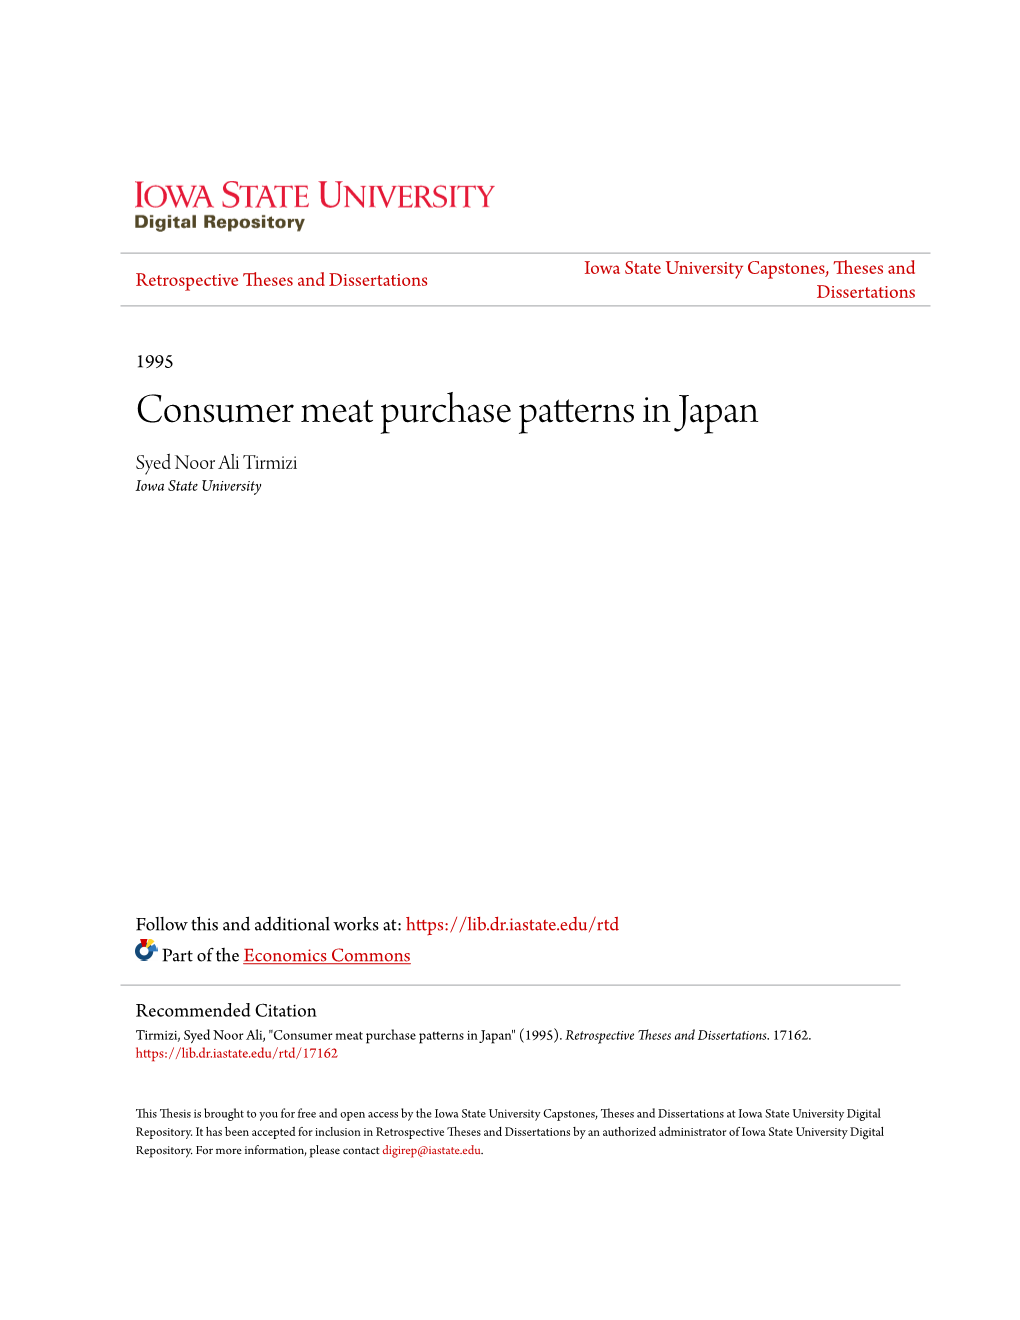 Consumer Meat Purchase Patterns in Japan Syed Noor Ali Tirmizi Iowa State University